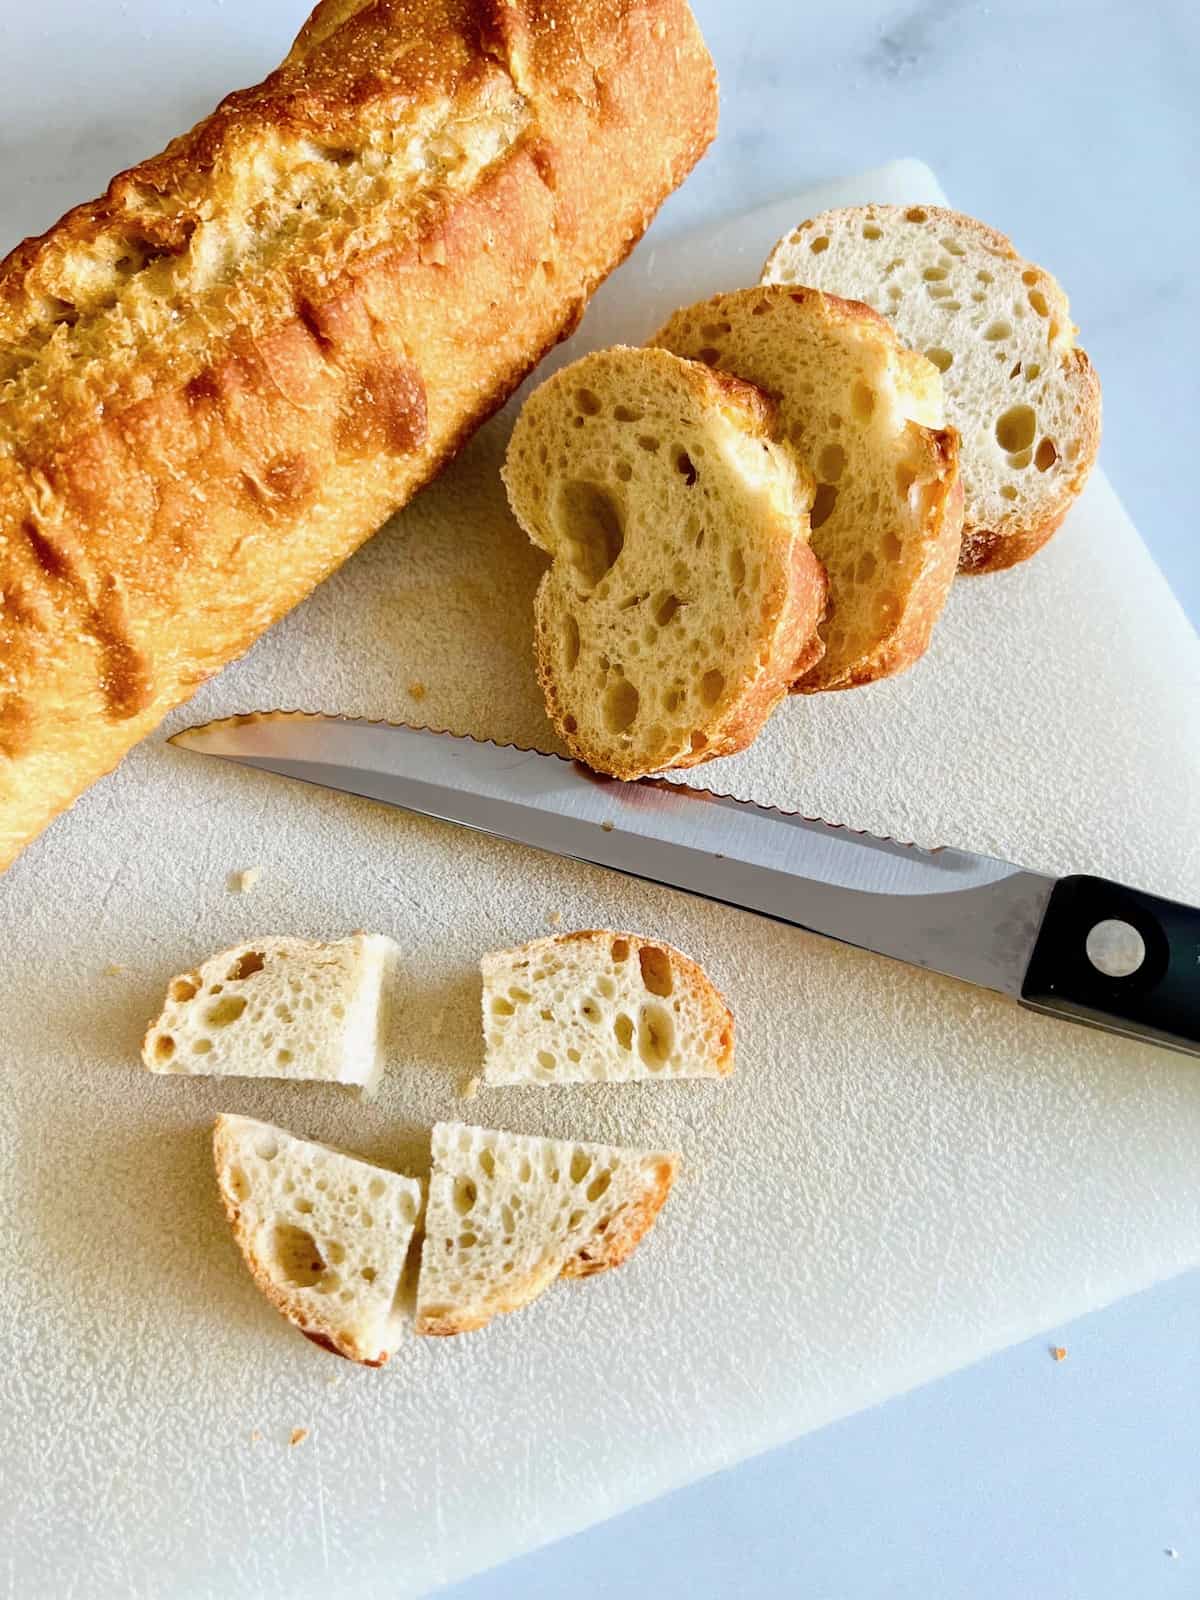 Cutting the bread into cubes on the board to be bite-size.